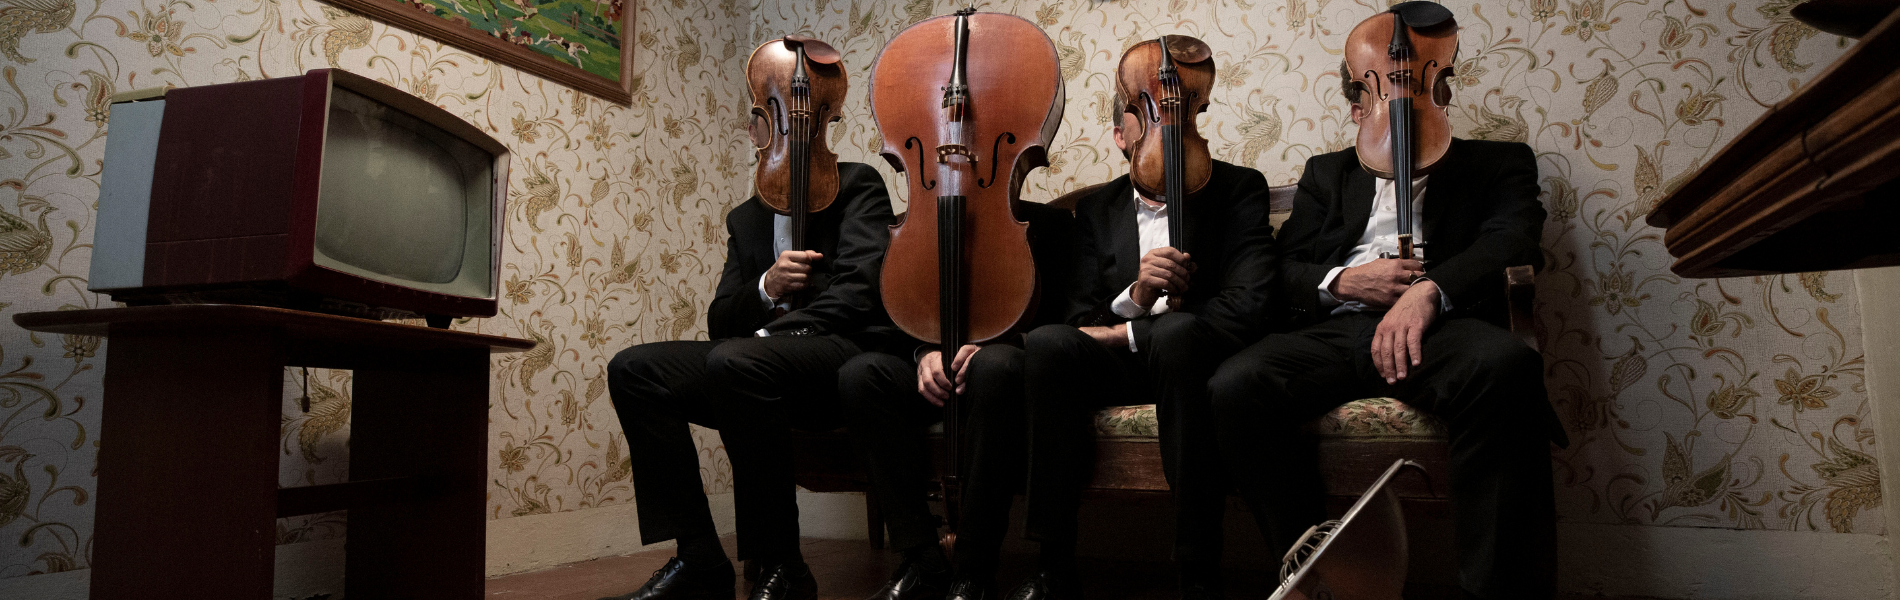 4 musicians holding string instruments in front of their faces